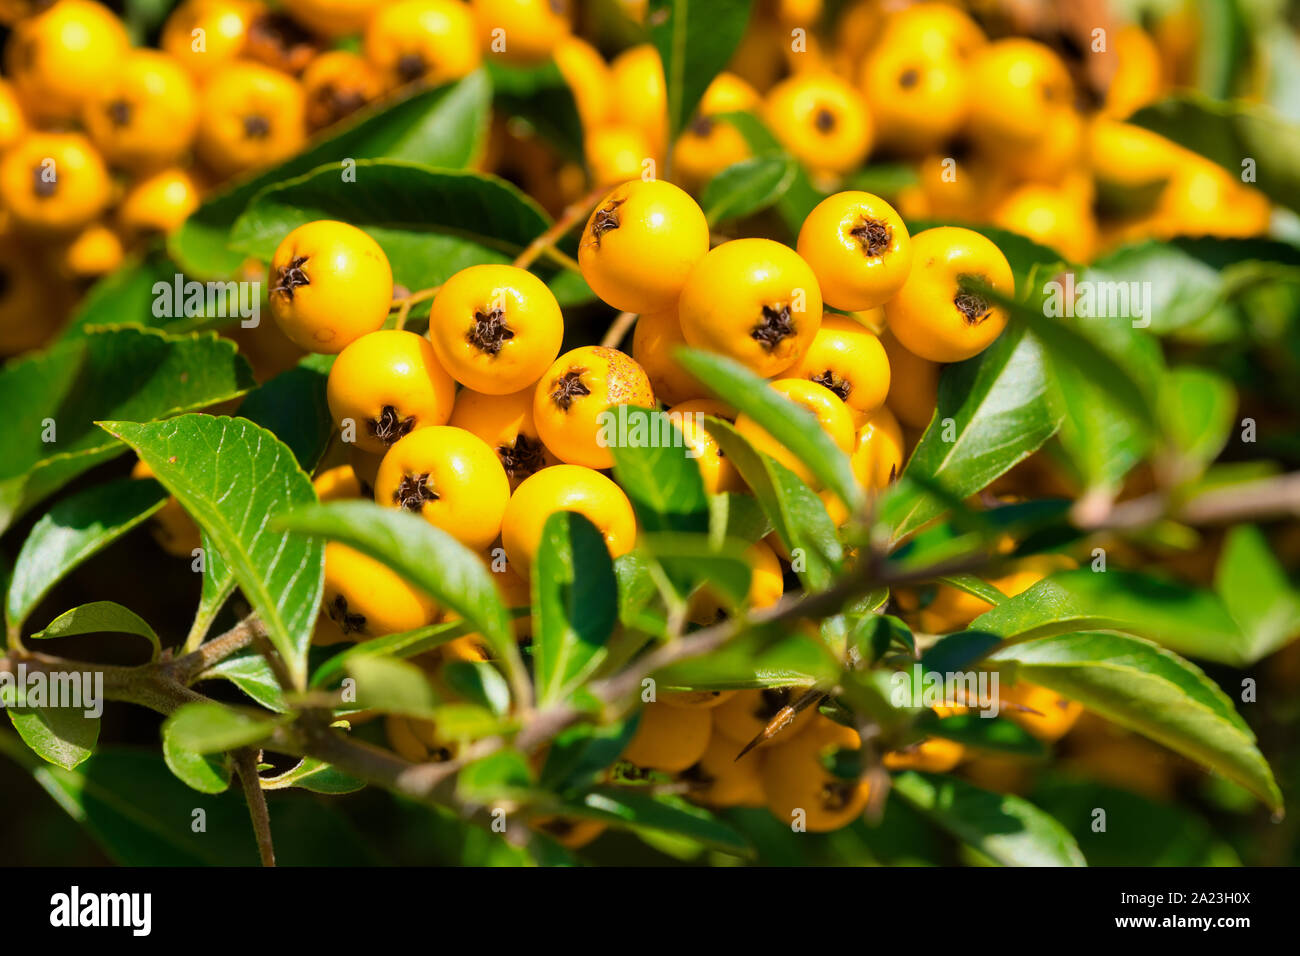 close up of a firethorn plant in Latin called Pyracantha coccinea Stock Photo